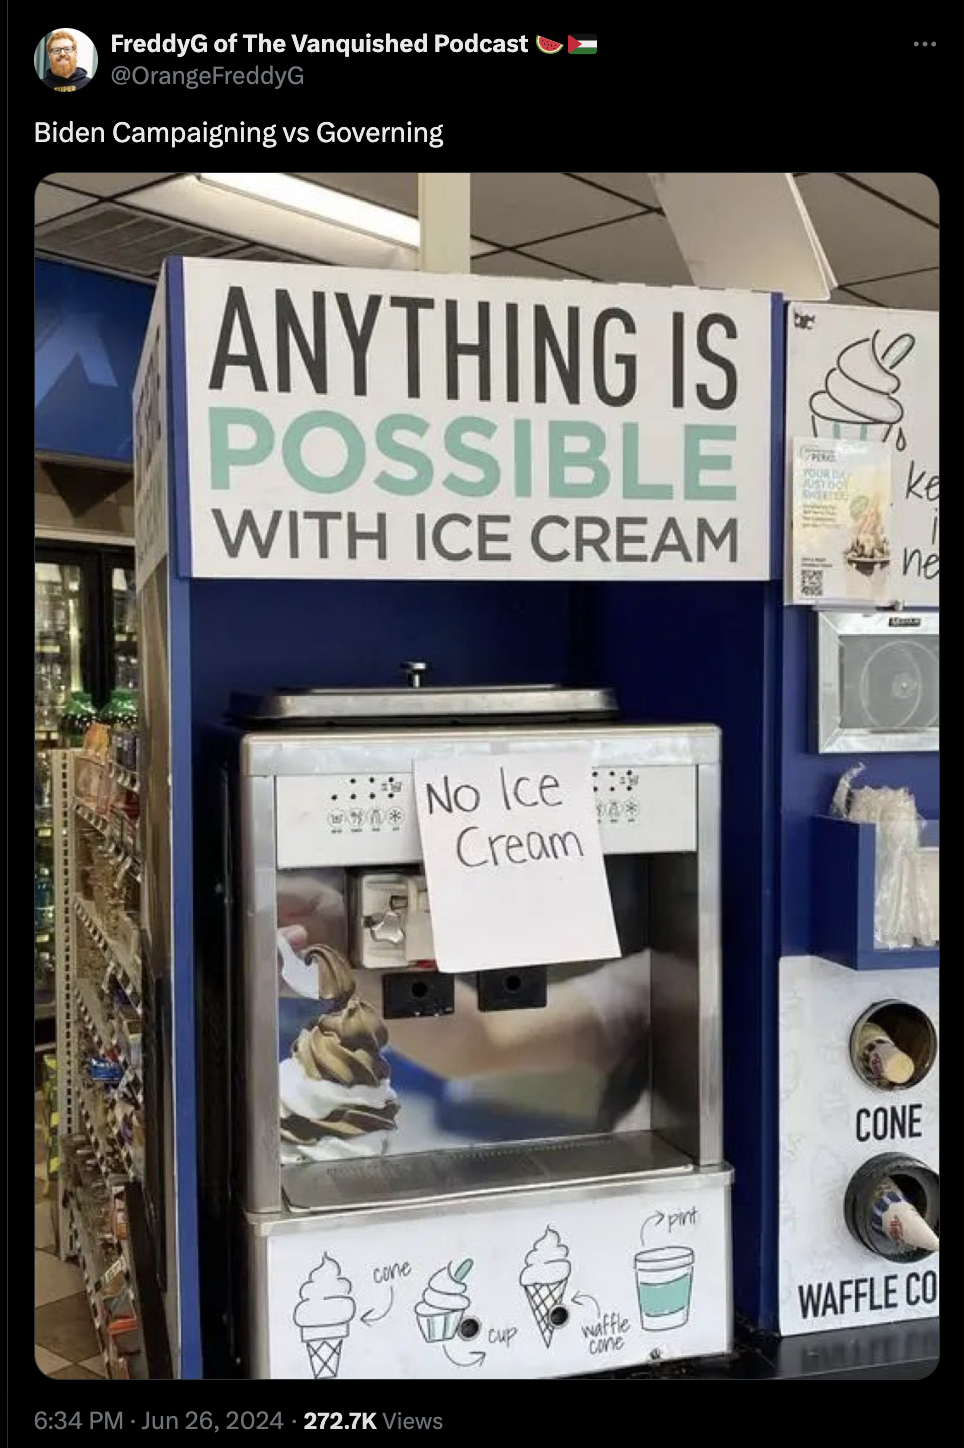 Ice cream - FreddyG of The Vanquished Podcast & OrangeFreddyG Biden Campaigning vs Governing Anything Is Possible With Ice Cream 18 ke ne cane Views No Ice Cream 10% Cone Waffle Co